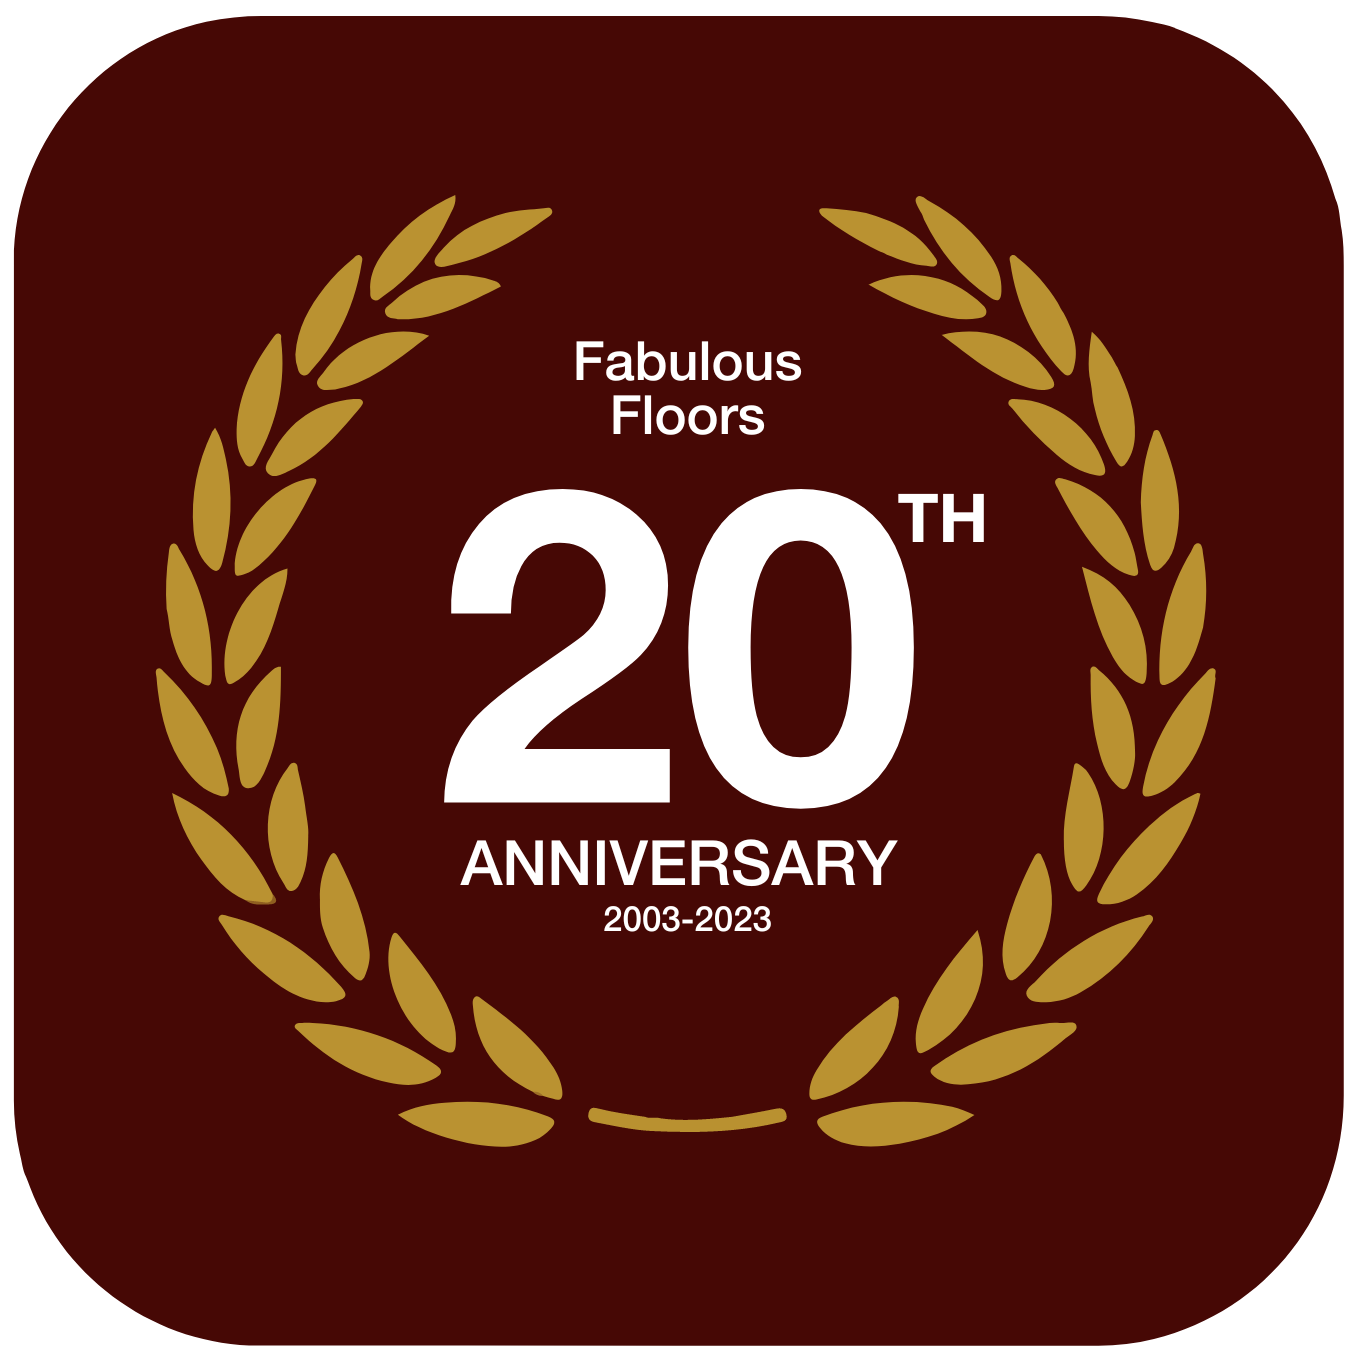 A Fabulous Floors badge showing 16 years of service as a company.